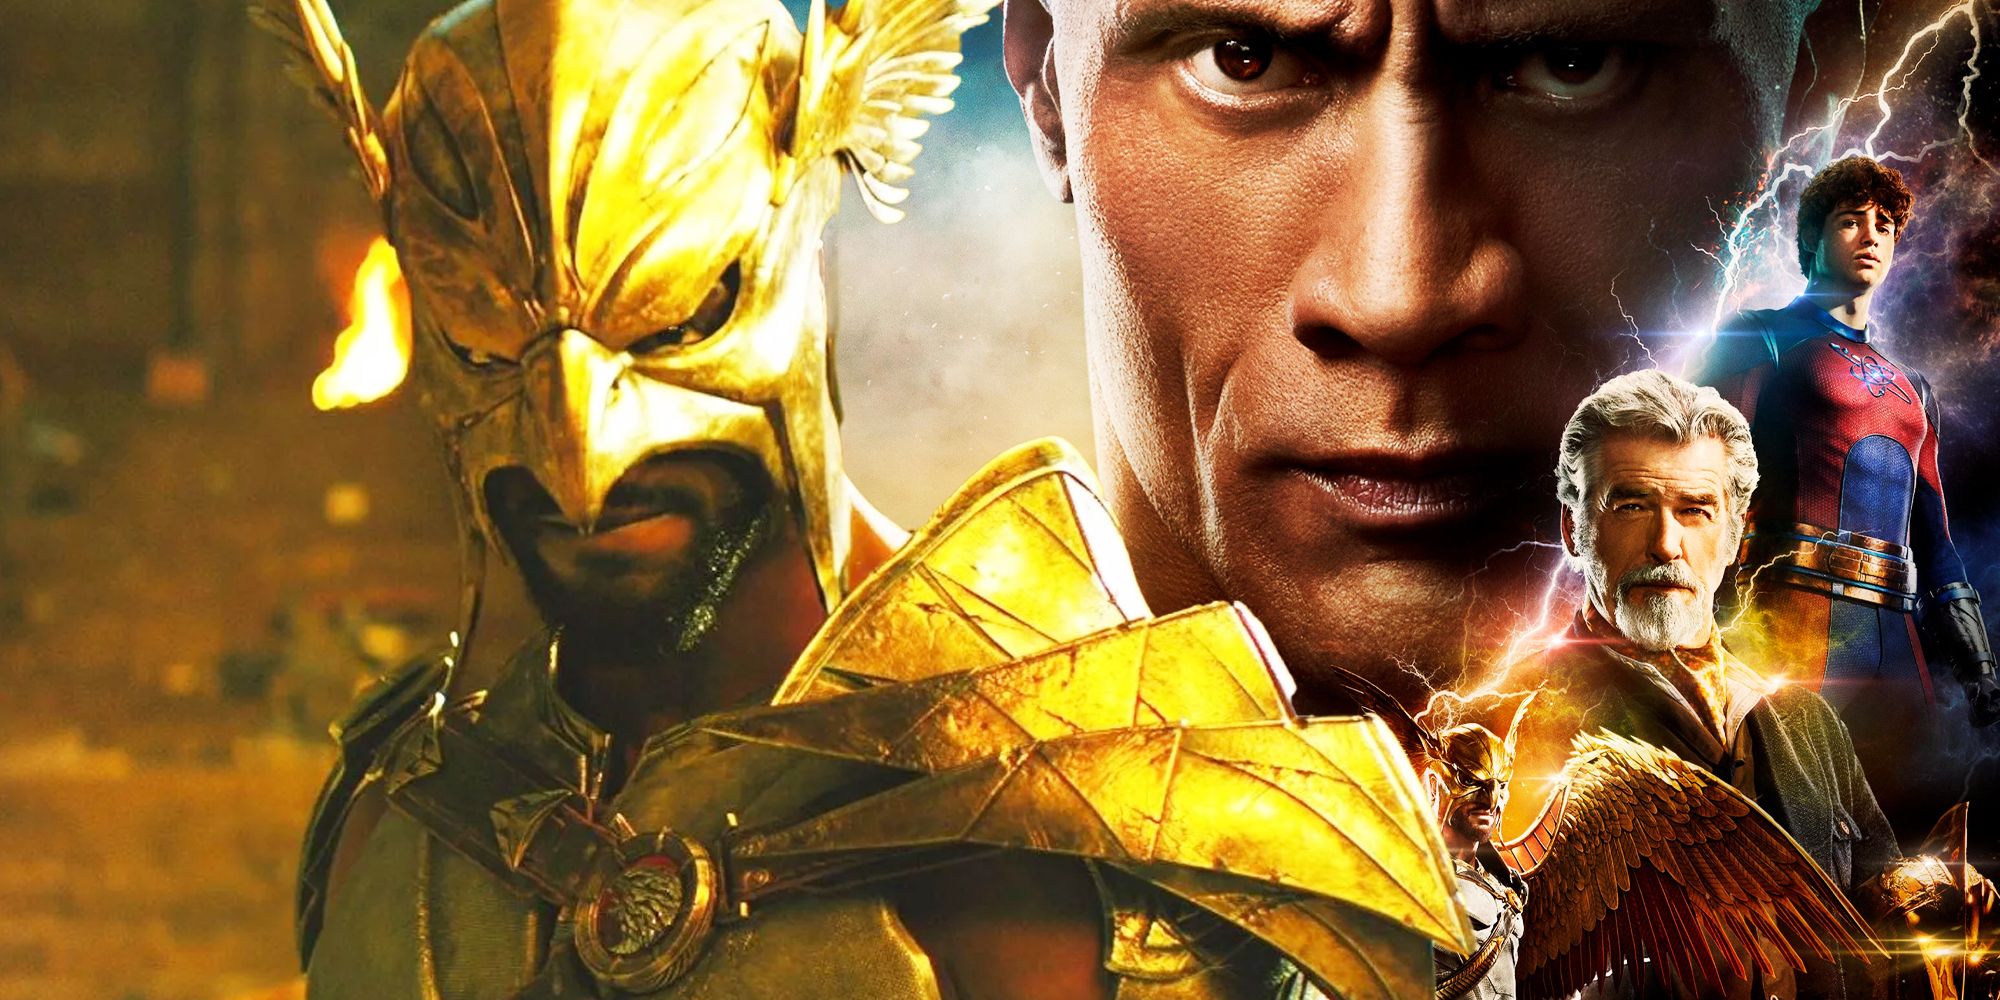 Hawkman and the Black Adam Poster